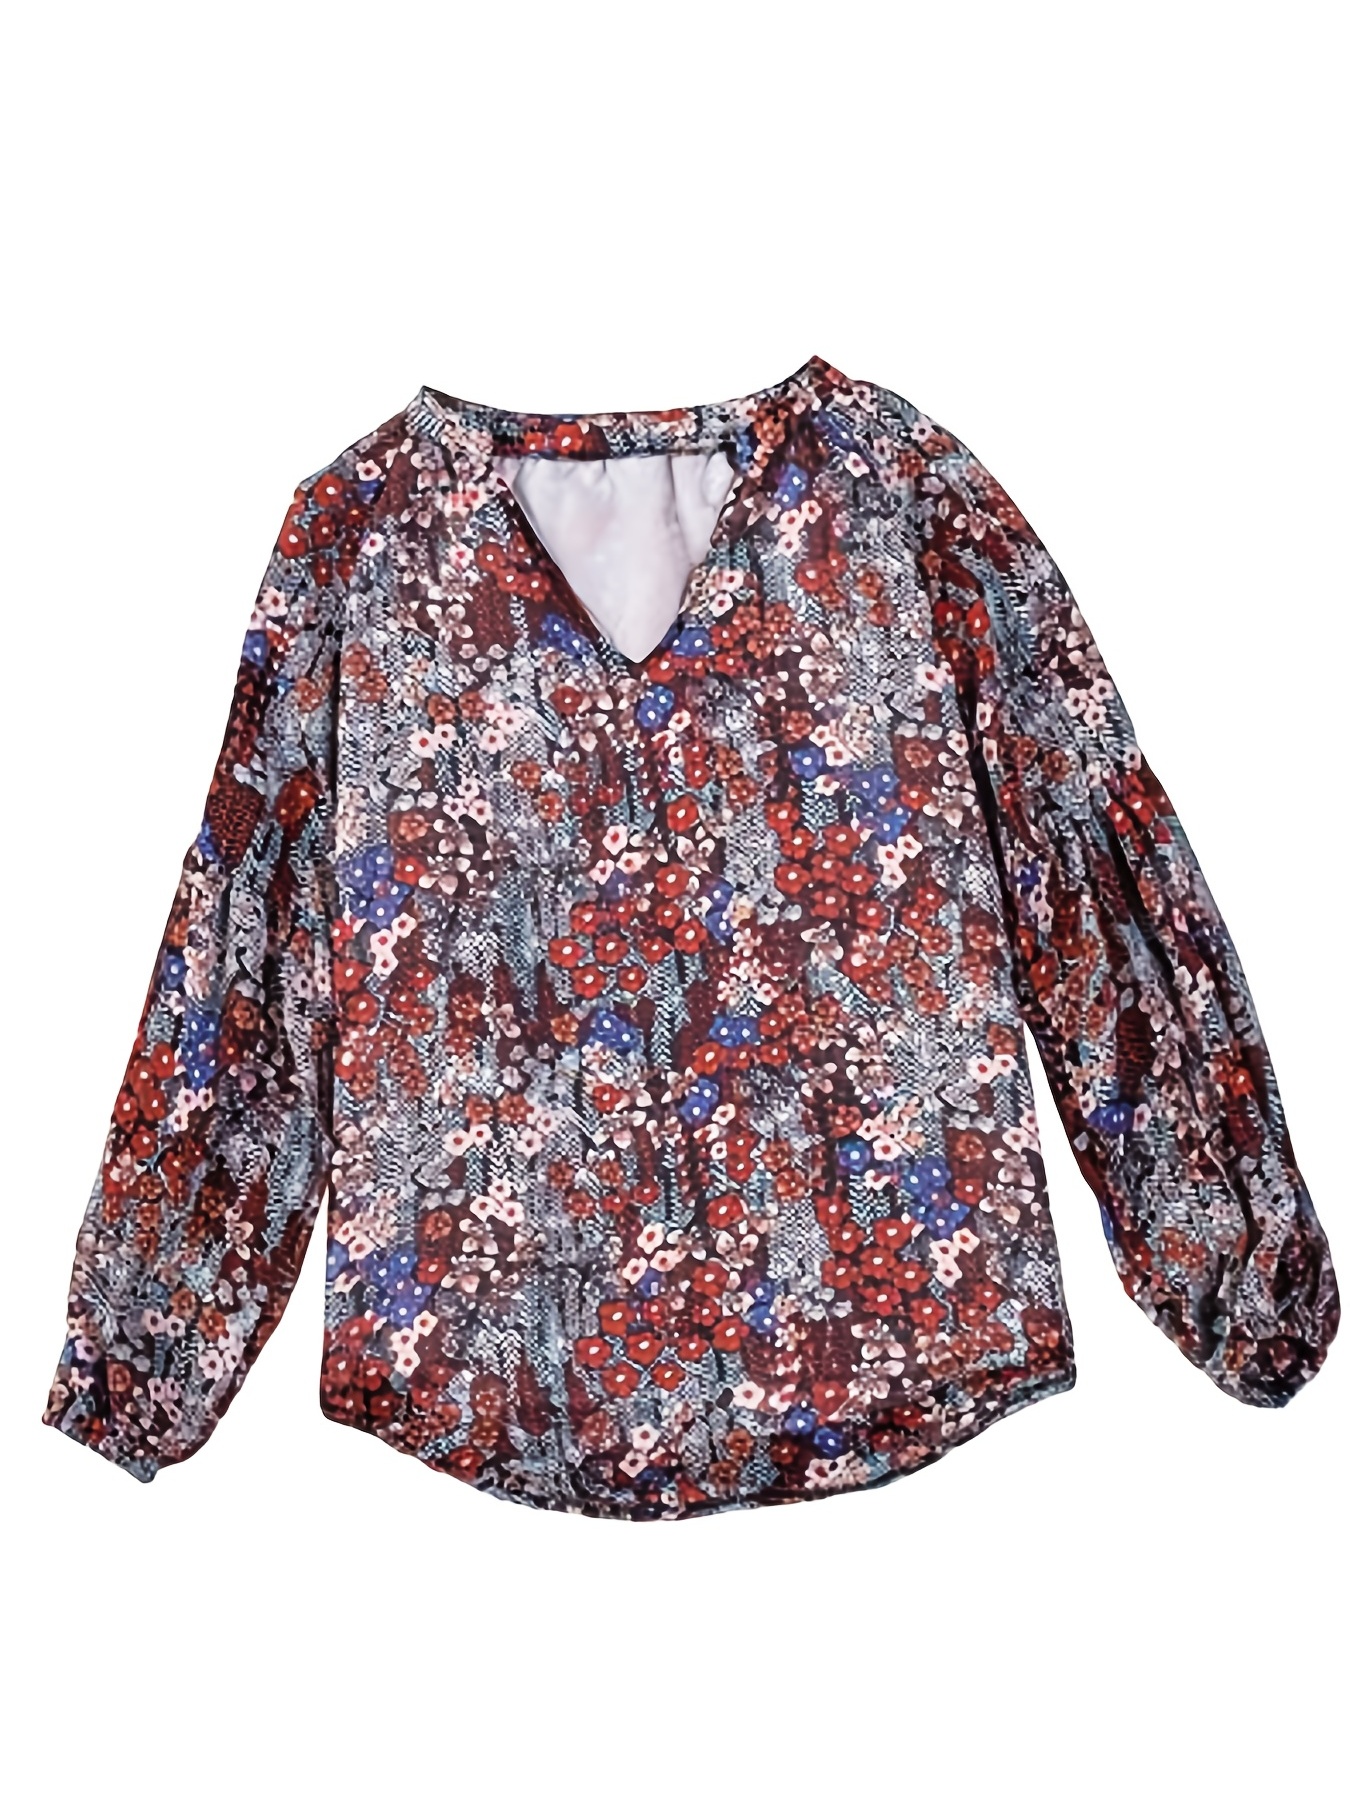 Ladies Floral Print Lantern Sleeve Blouse, V-Neck Long Sleeve Blouse,  Casual Every Day Tops, Women's Clothing